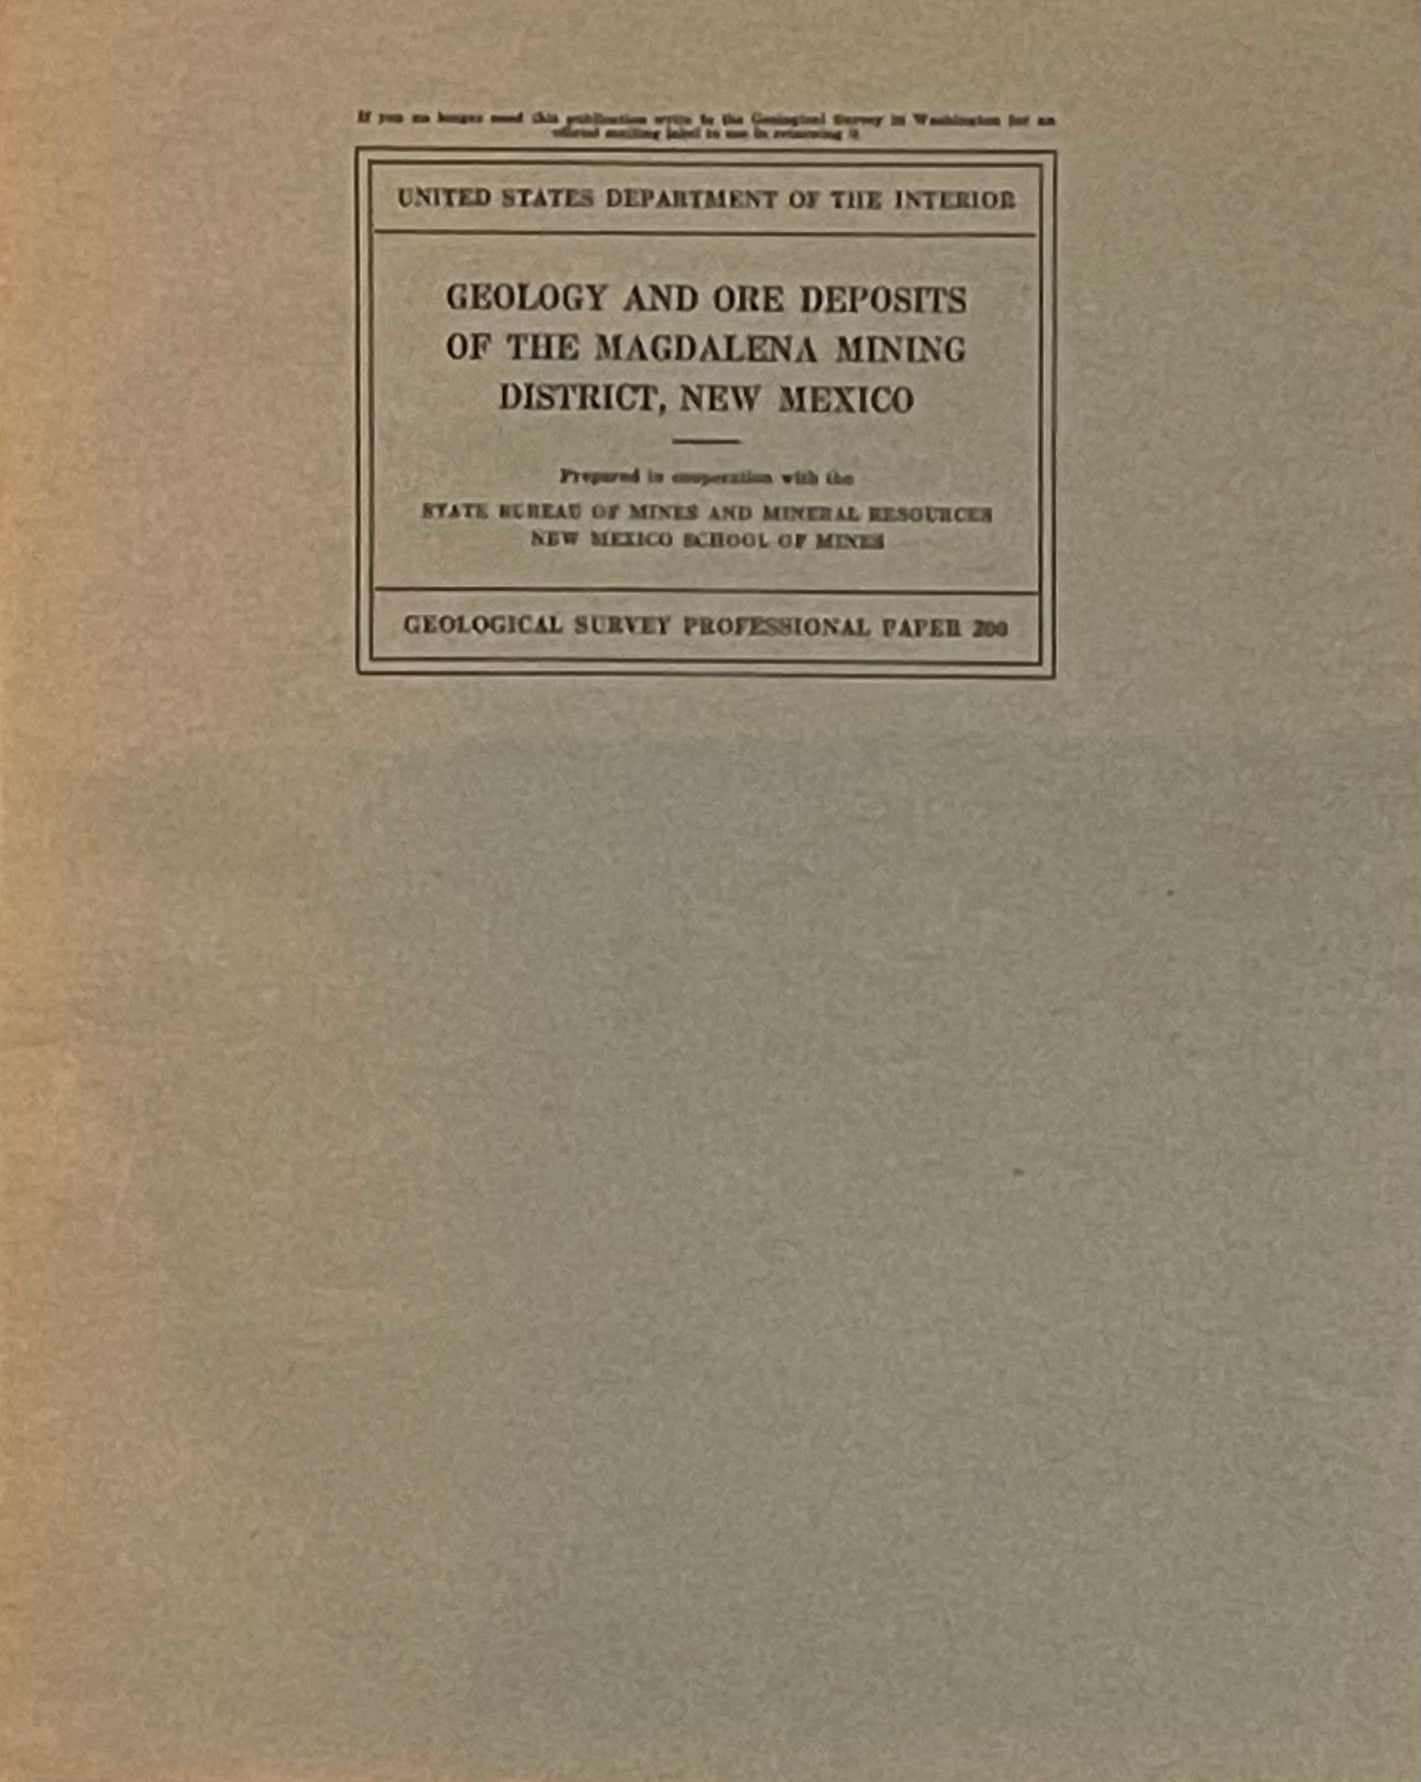 Geology and Ore Deposits of the Magdalena Mining District, New Mexico by G.F. Loughlin and A.H. Koschmann Assumed First Edition Published in 1942 by The United States Government Printing Office